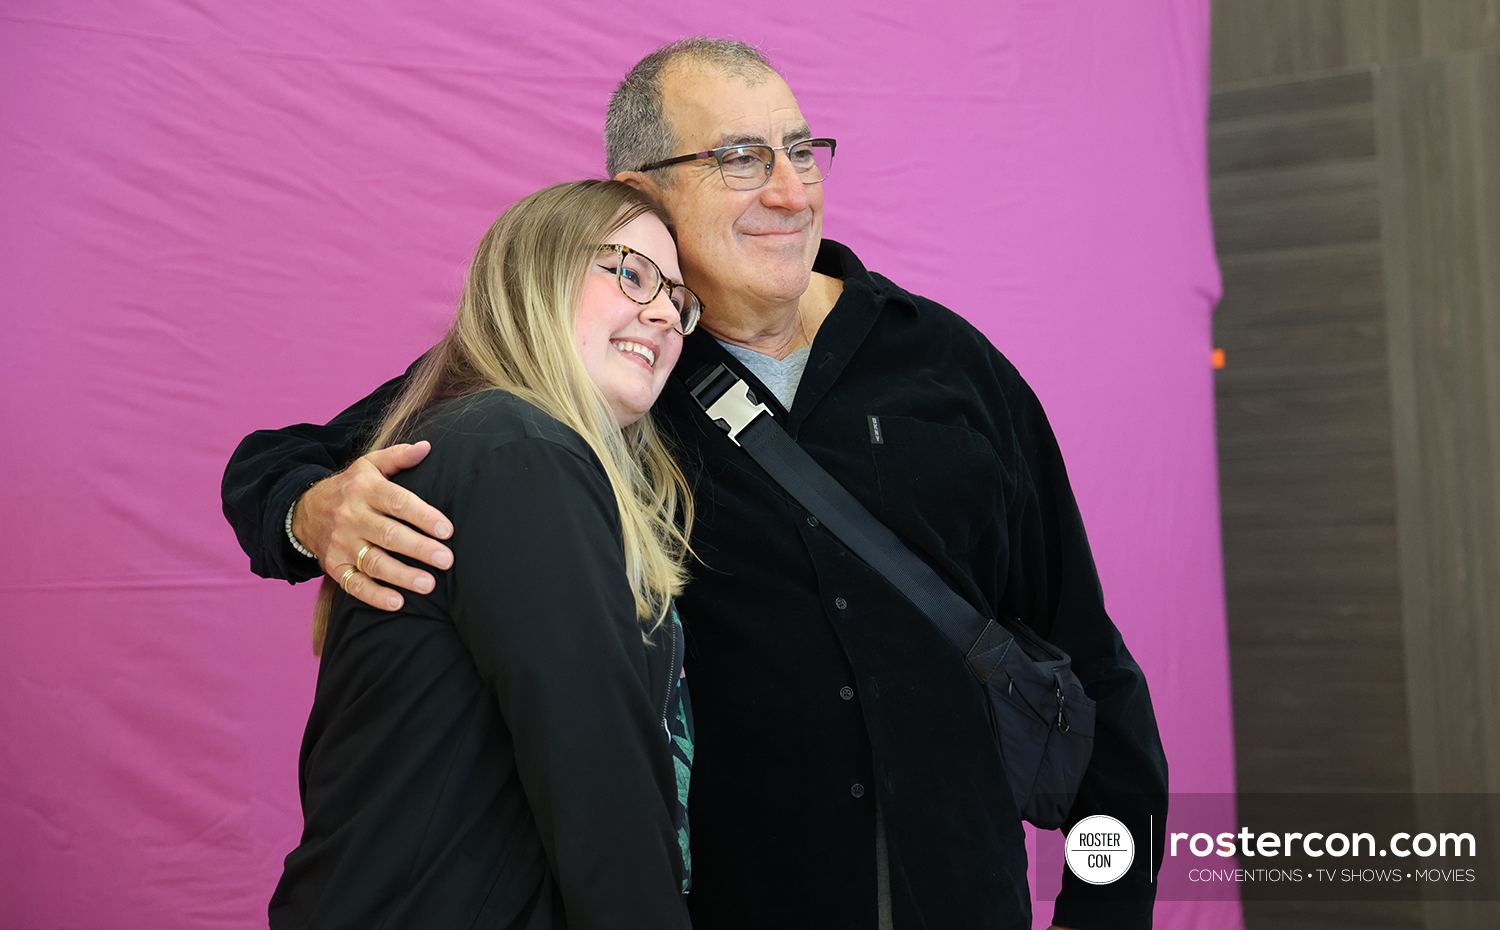 Photoshoot Kenny Ortega - High School Musical, Descendants, Julie and the Phantoms - Back To The Musical World